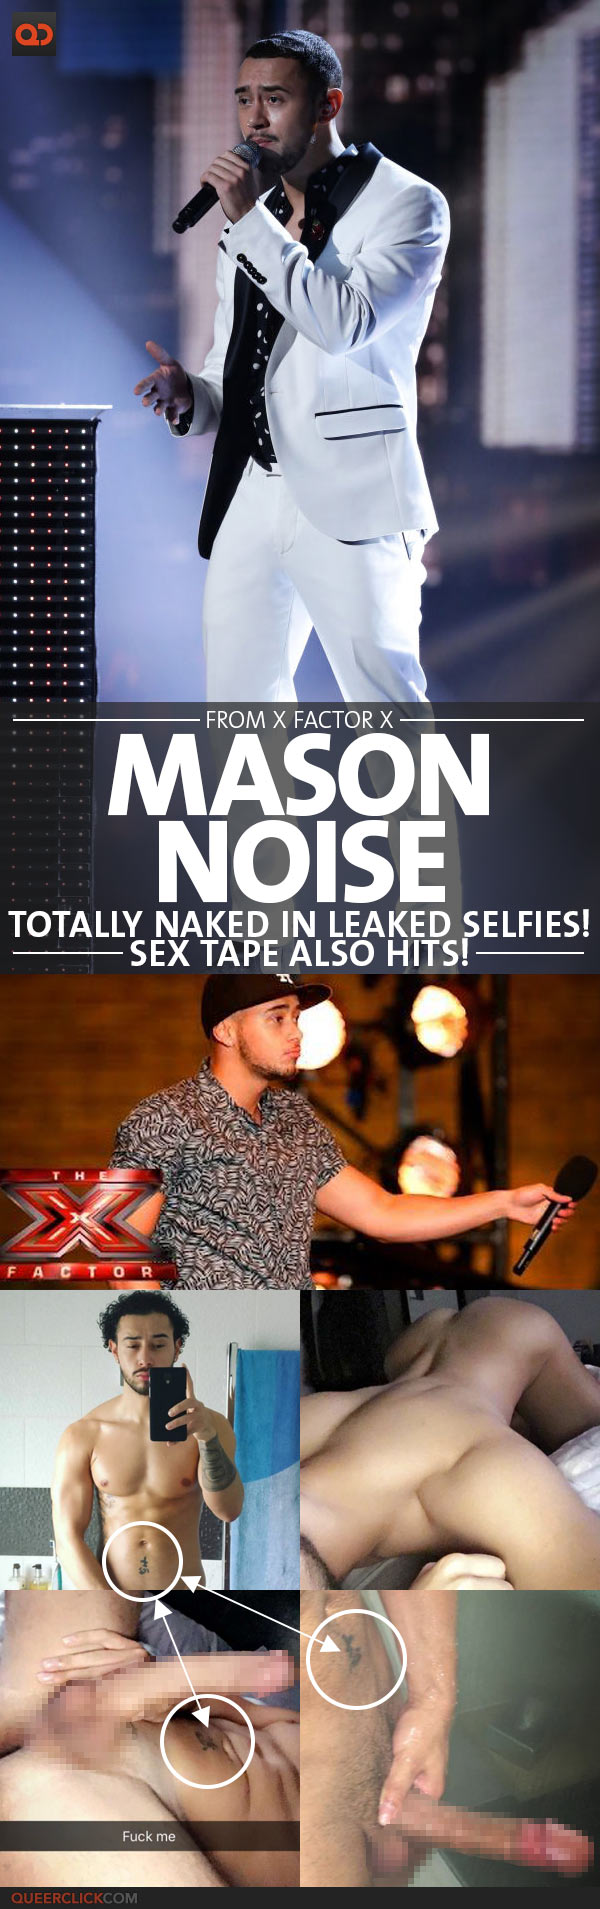 Mason Noise, From X Factor UK, Totally Naked In Leaked Selfies! - Sex Tape Also Hits!